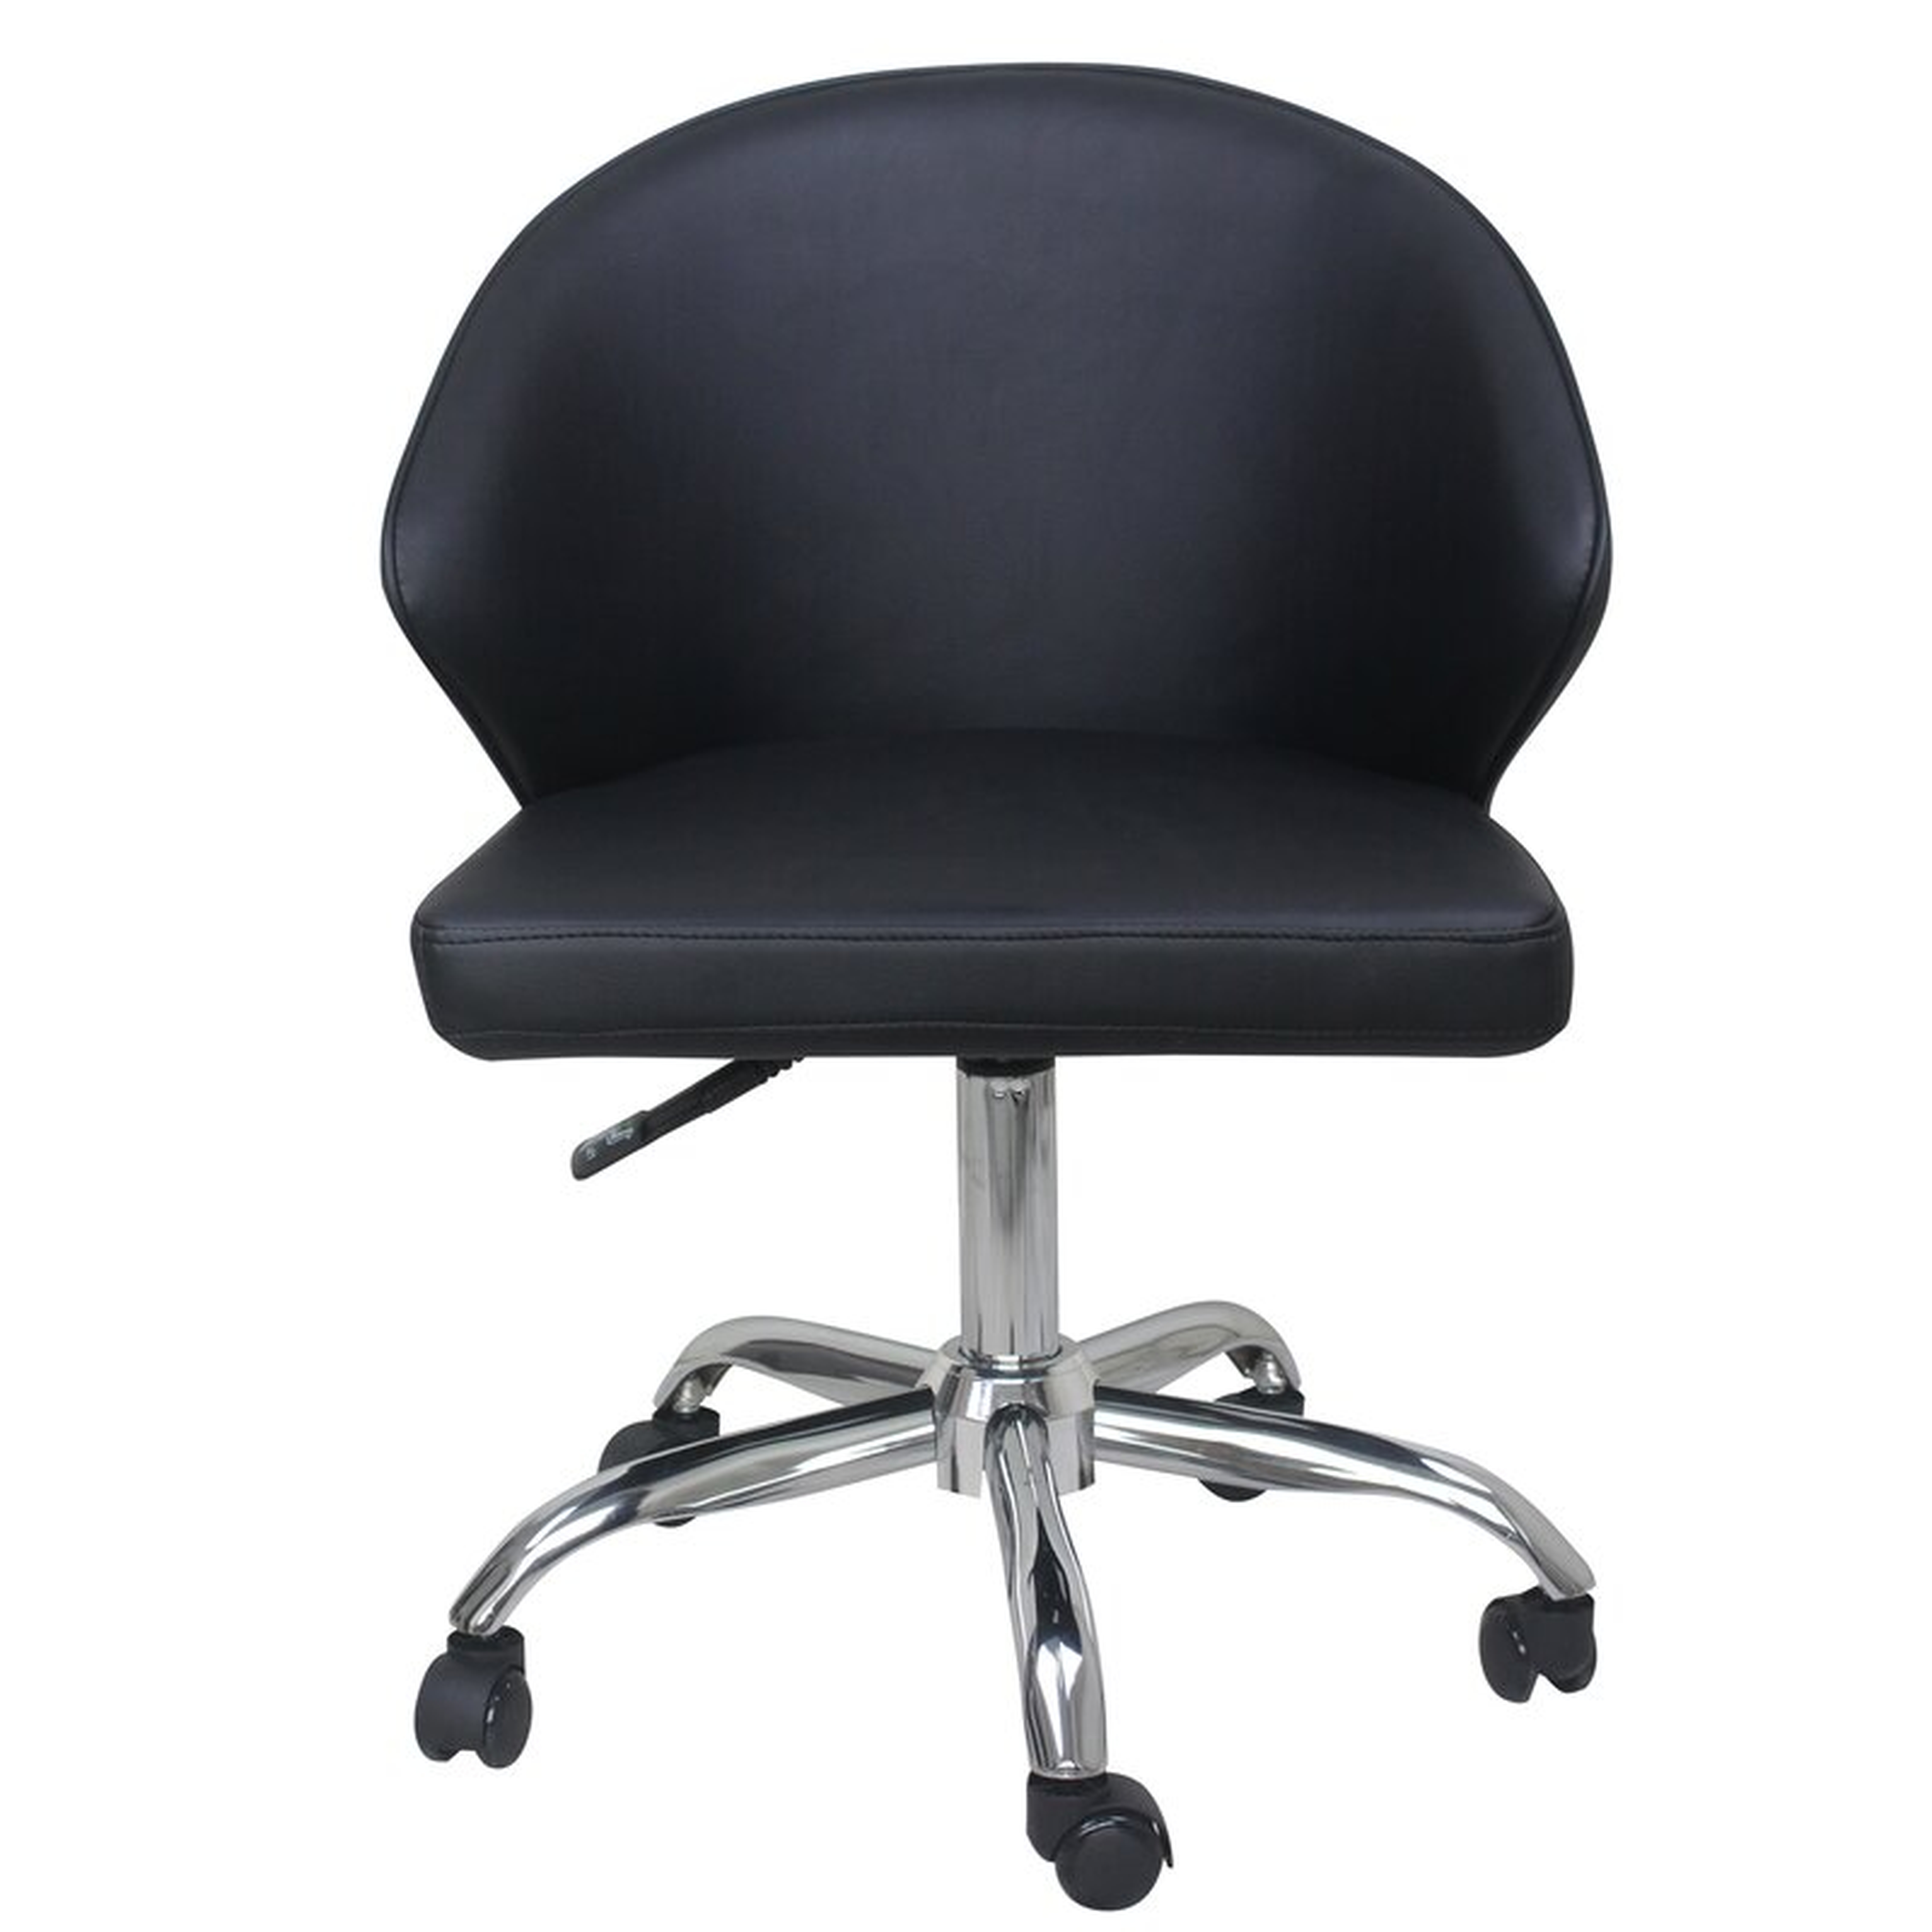 Moe's Home Collection Albus Swivel Office Chair Black Upholstery Color: Black - Perigold